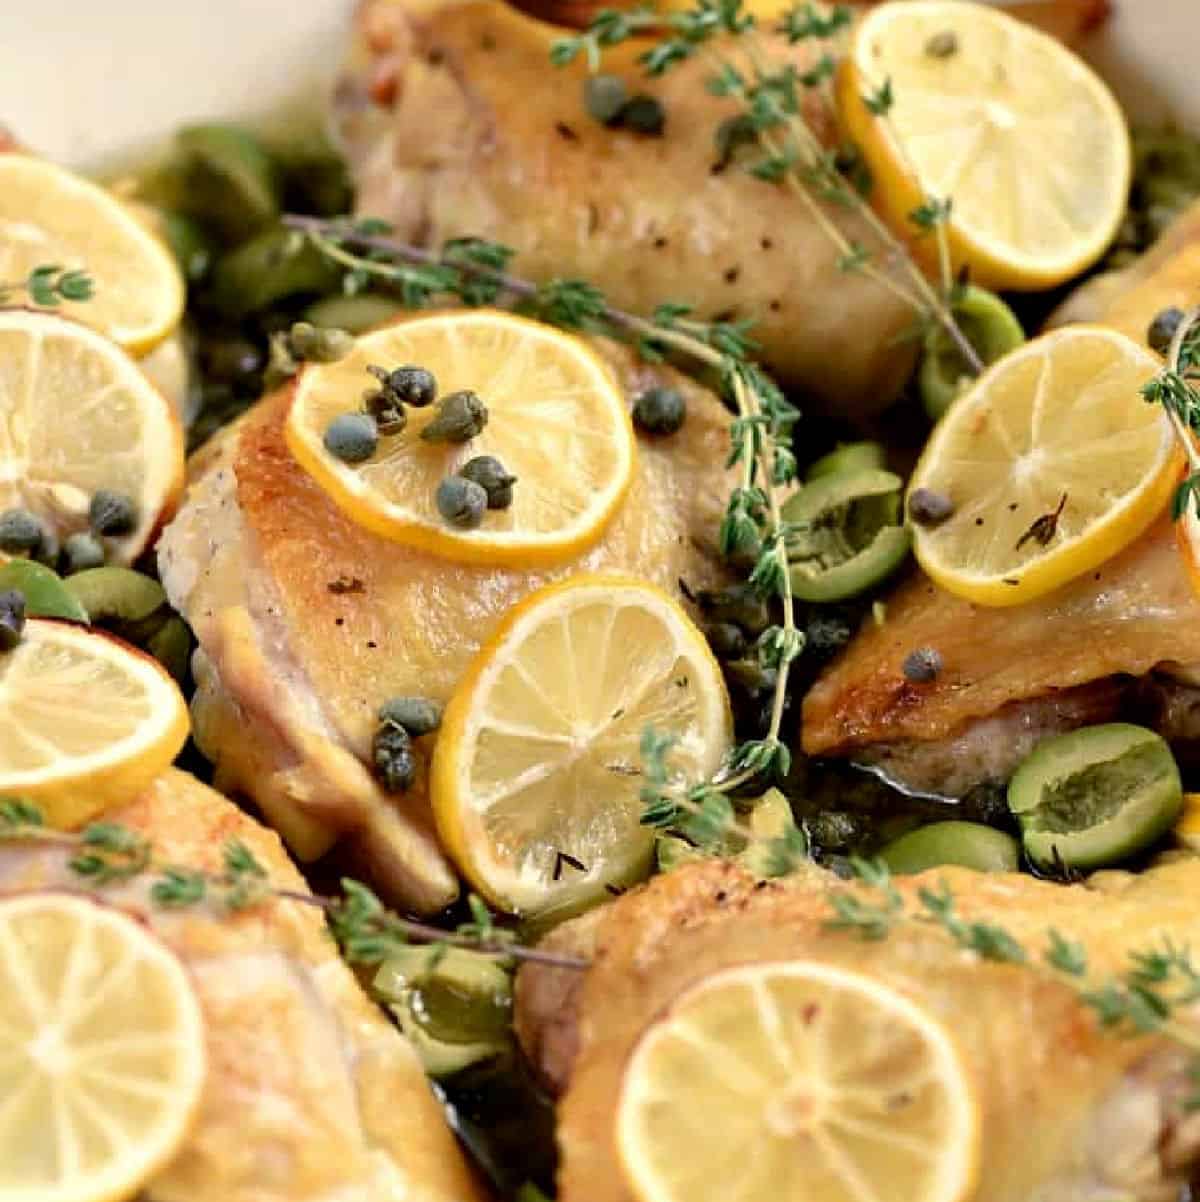 Chicken thighs with olives, capers, and lemon slices.